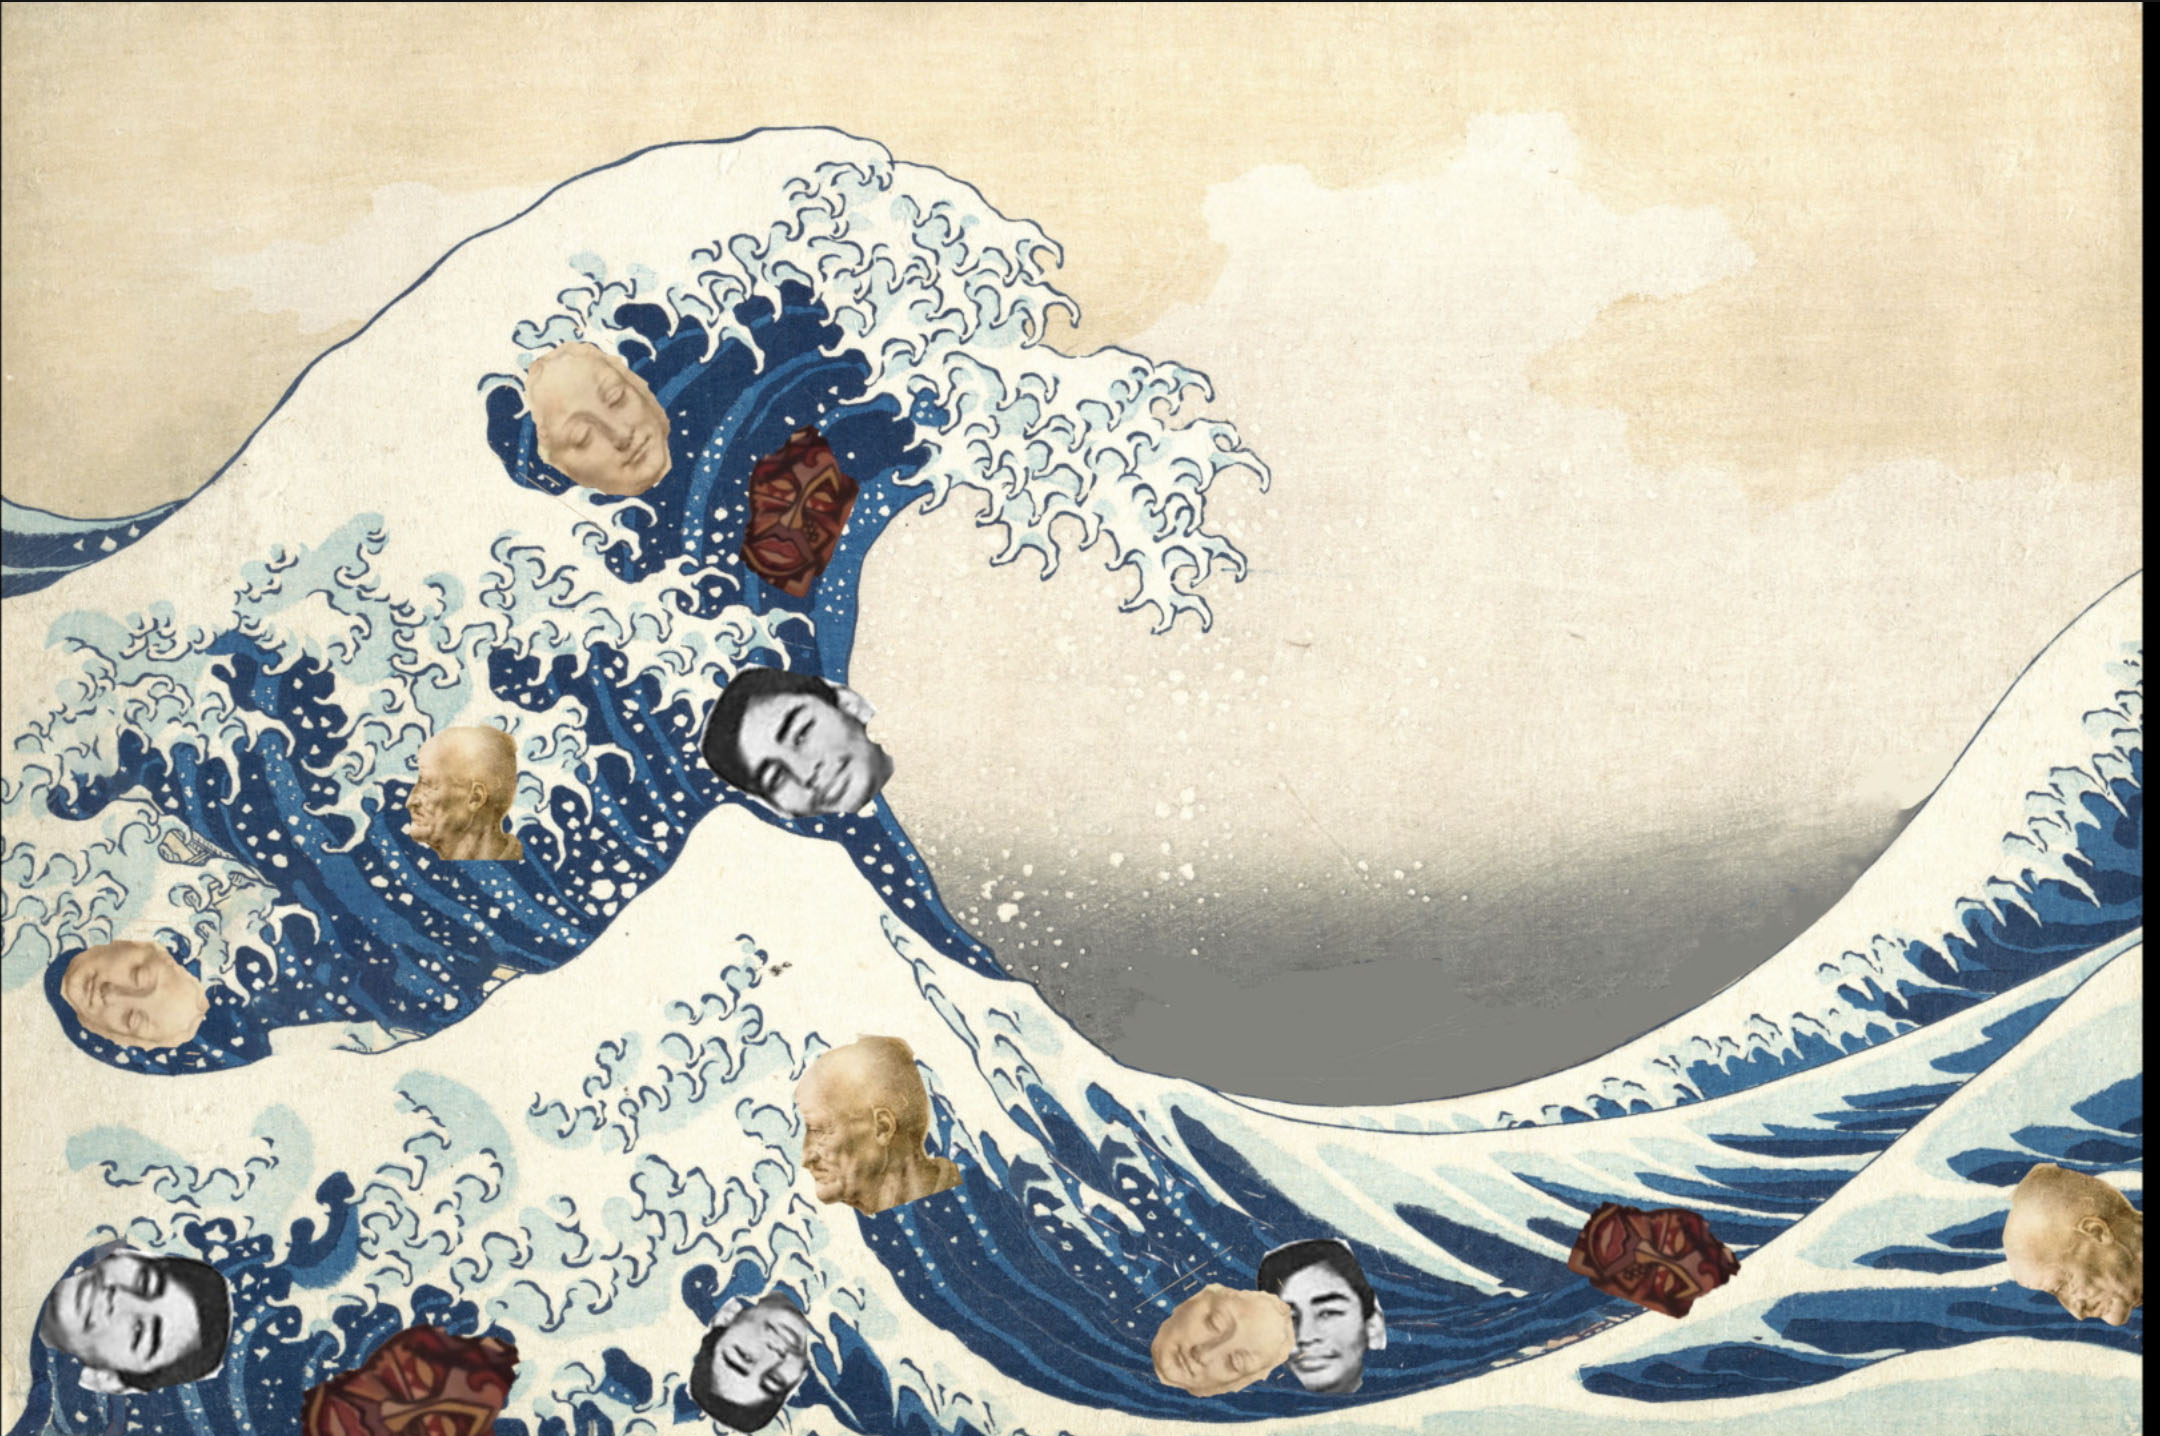 part of the Hokusai wave - with multicultural heads to show the black, brown and white people caught up and destroyed in the pandemic